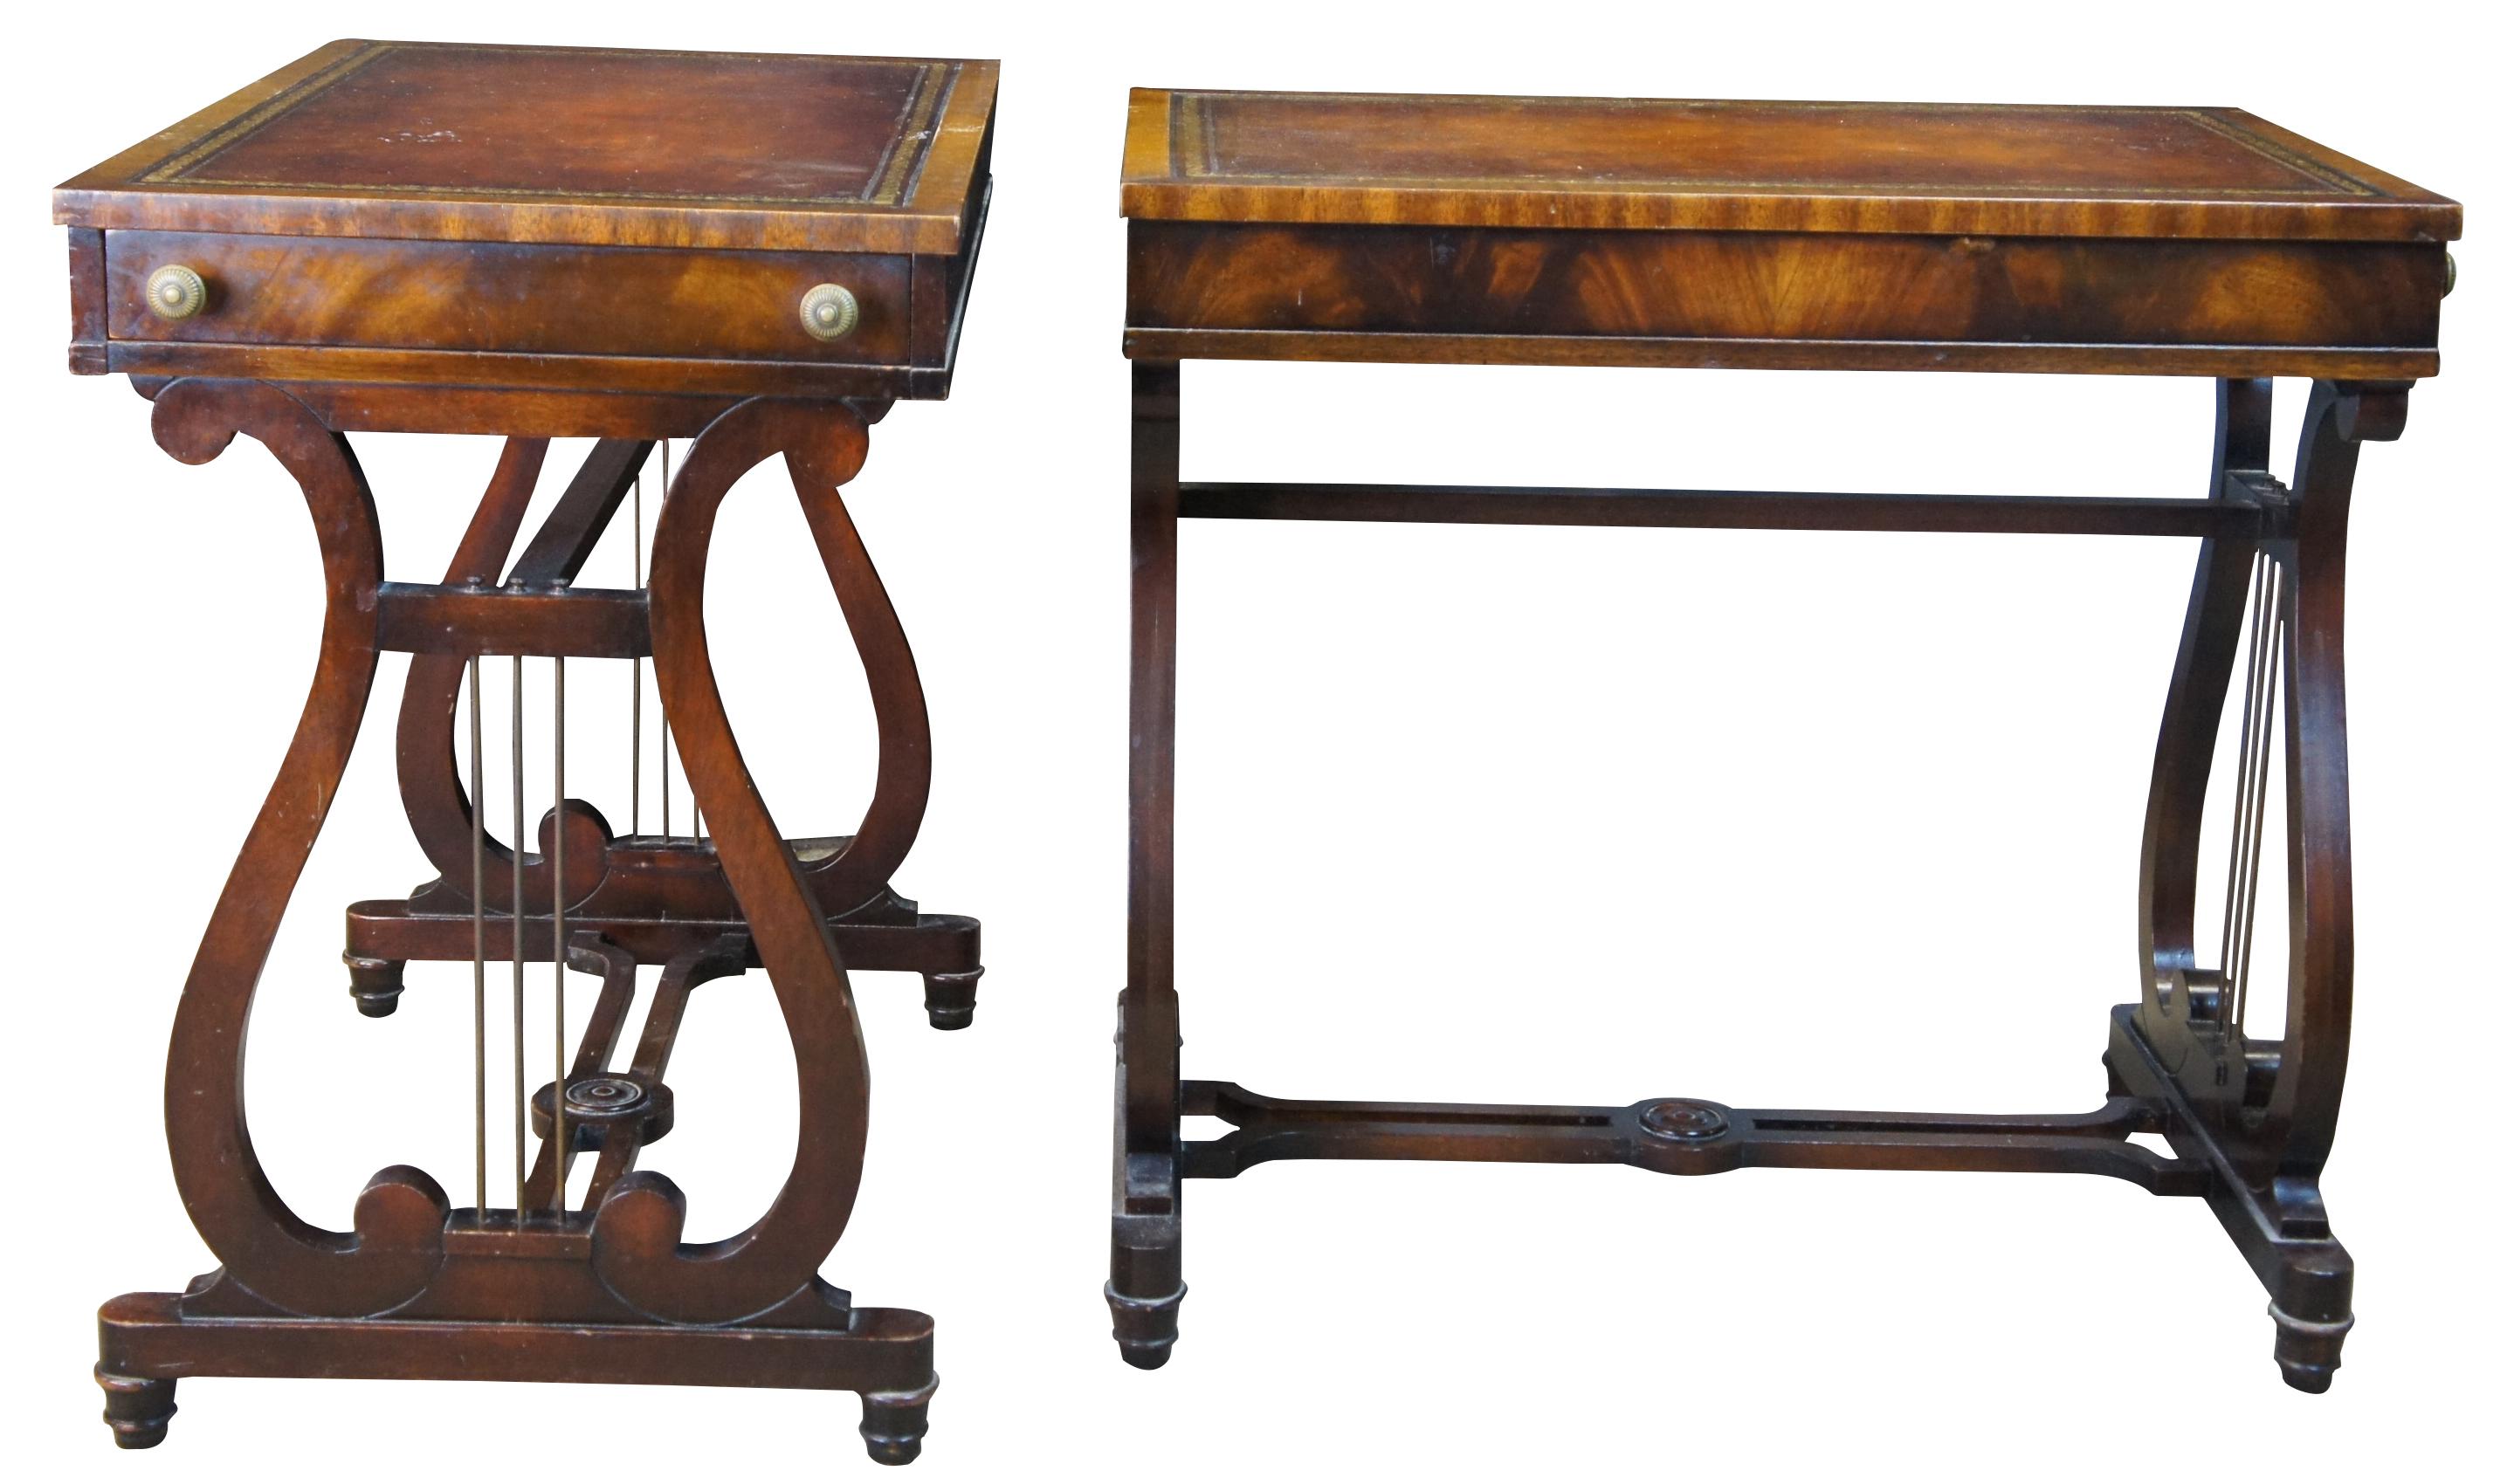 An elegant pair of Heirloom Weiman end tables, circa 1930s. Features a rectangular top with tooled leather top and drawer over a lyre shaped base. Made from mahogany with flame mahogany apron and drawer front. #9405.